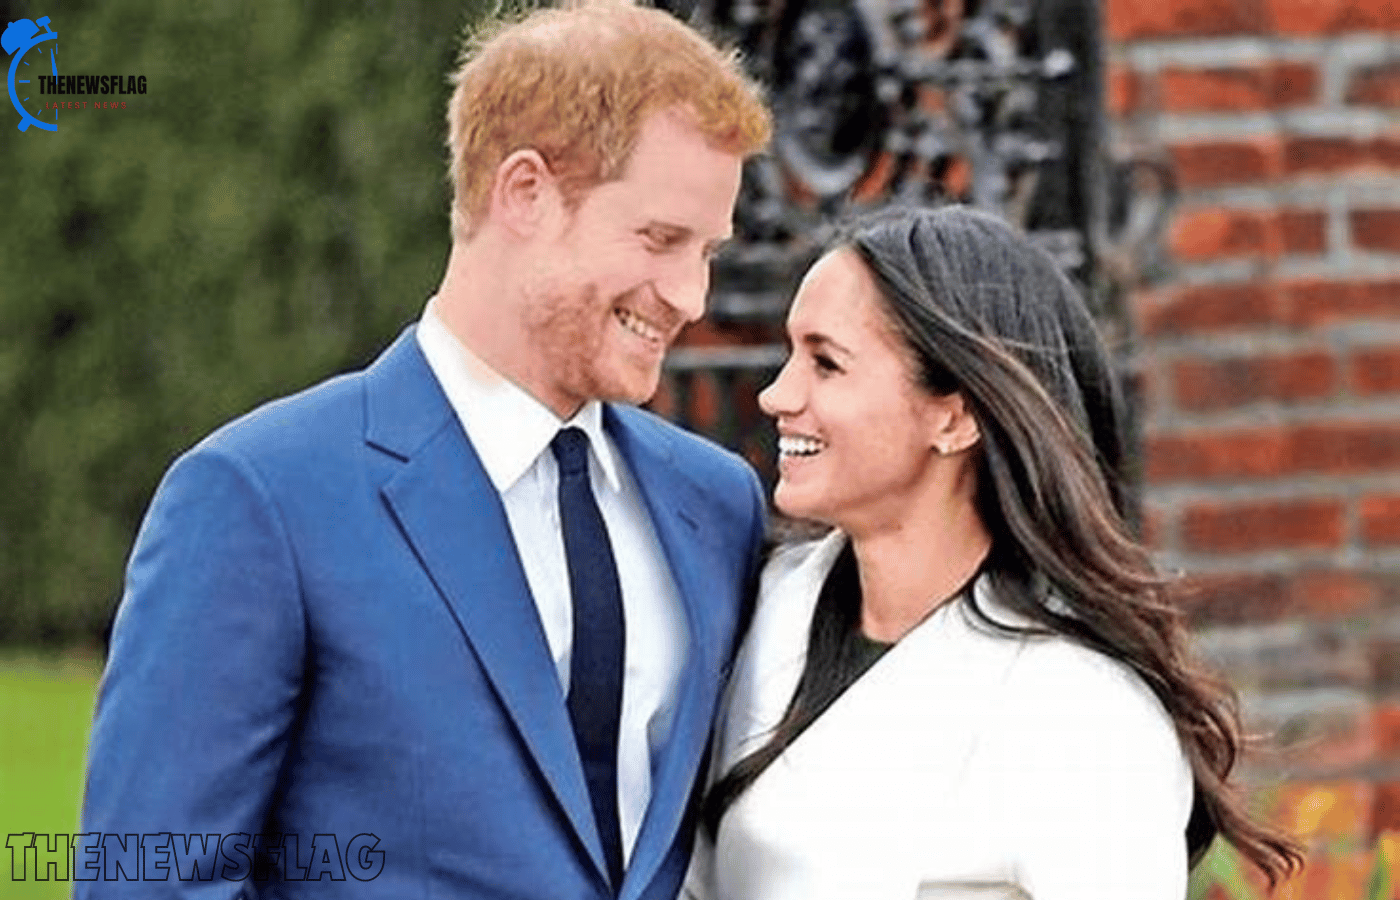 Watch as Prince Harry and Meghan Markle surprise the relatives of the victims of the Uvalde school shooting and celebrate their birthday.